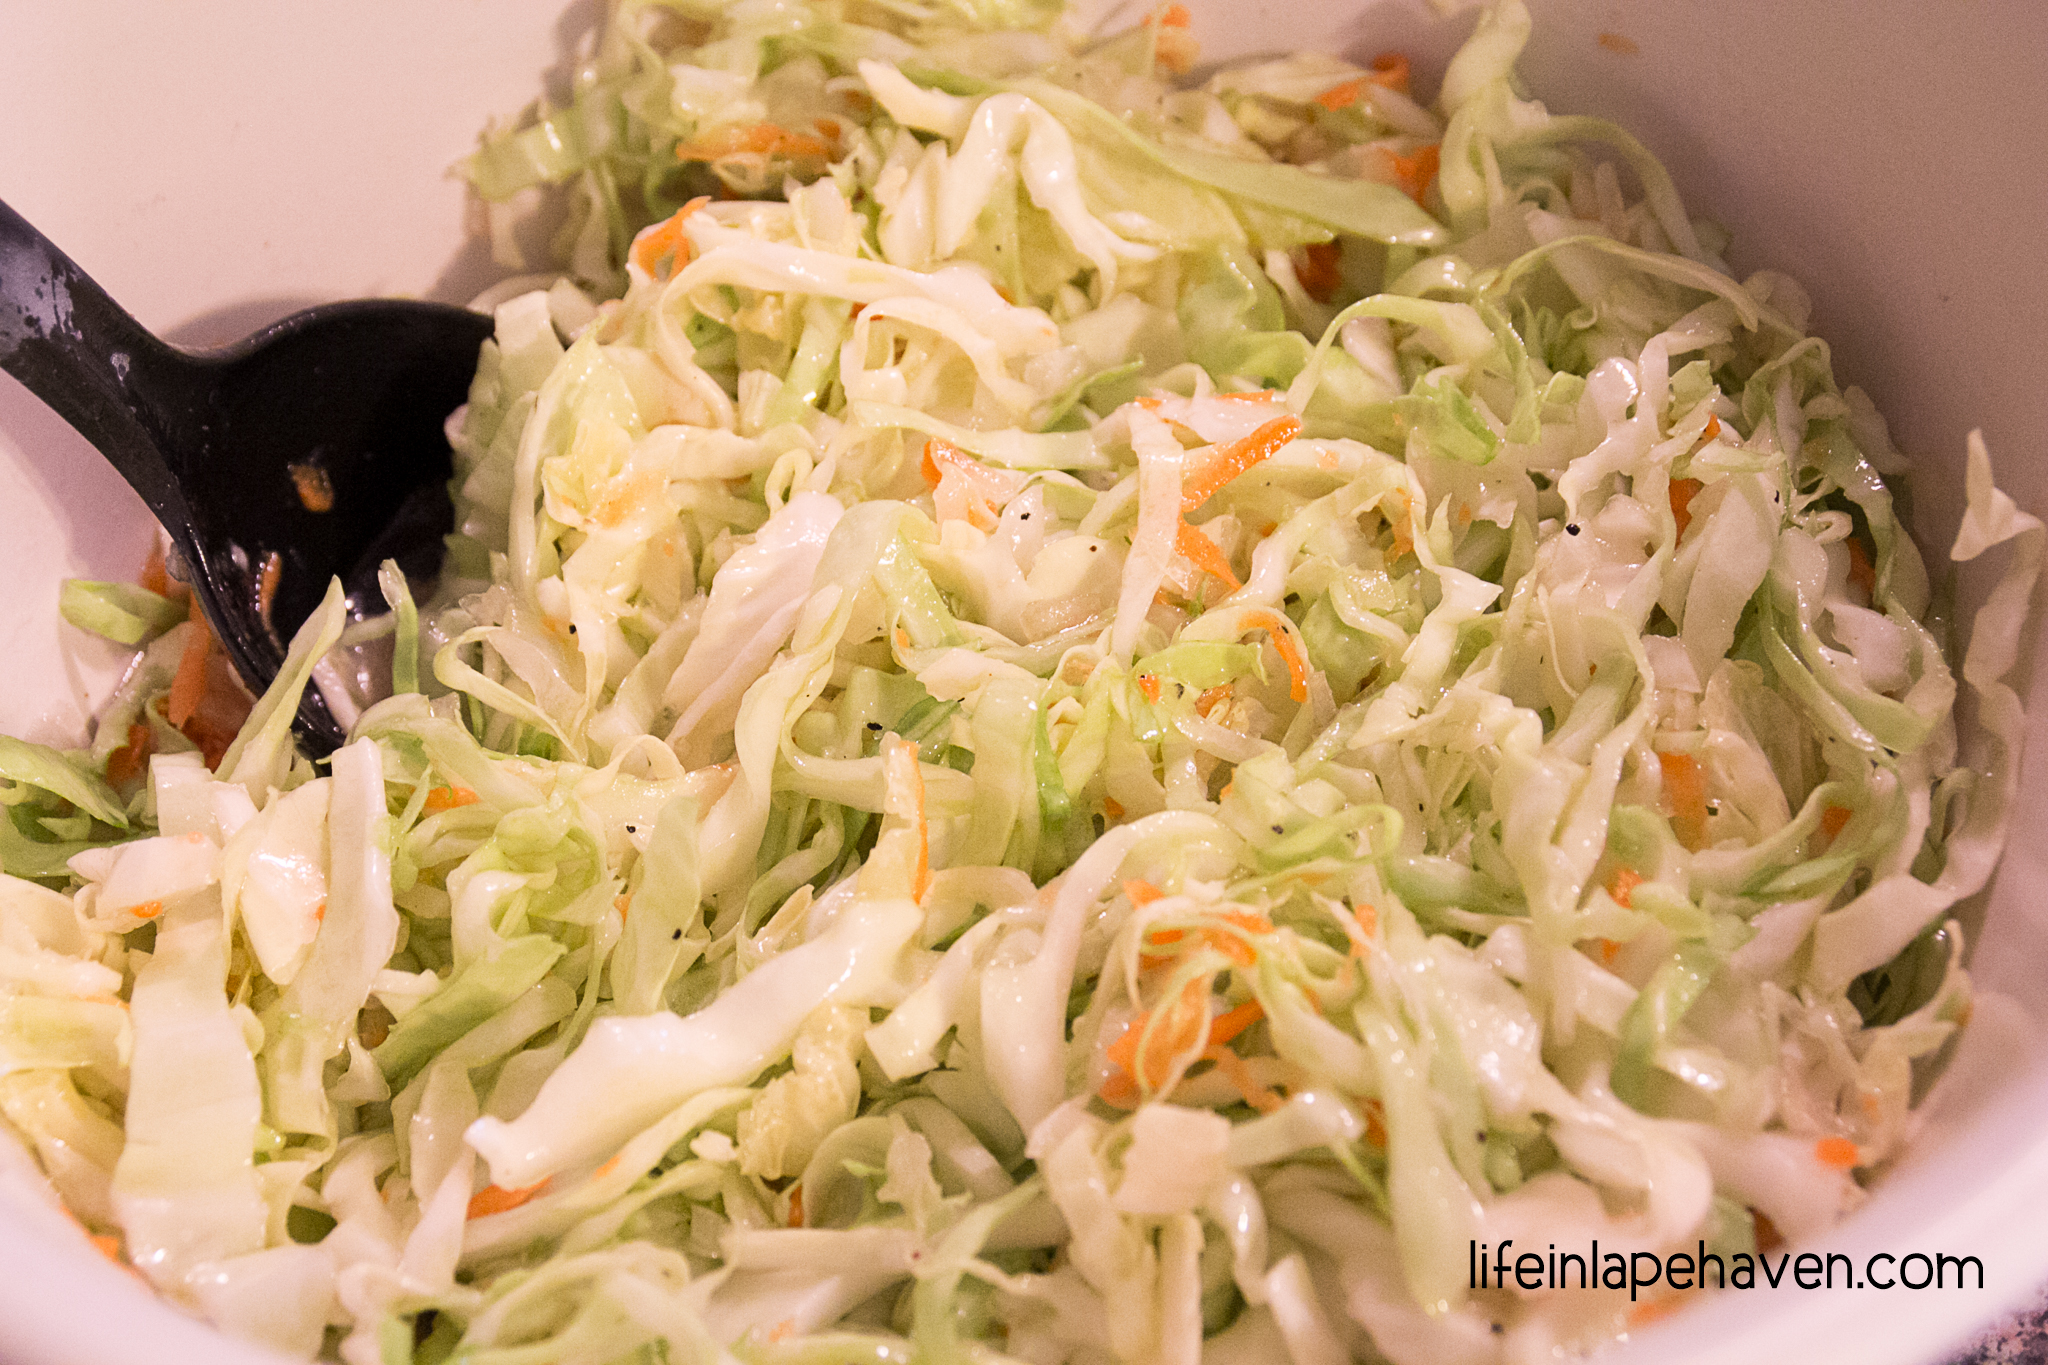 Life in Lape Haven: Tried It Tuesday: Sweet Vinegar Slaw. A yummy recipe for a vinegar-based cole slaw that is always a summer hit. Great side dish for barbecue and easy to make.